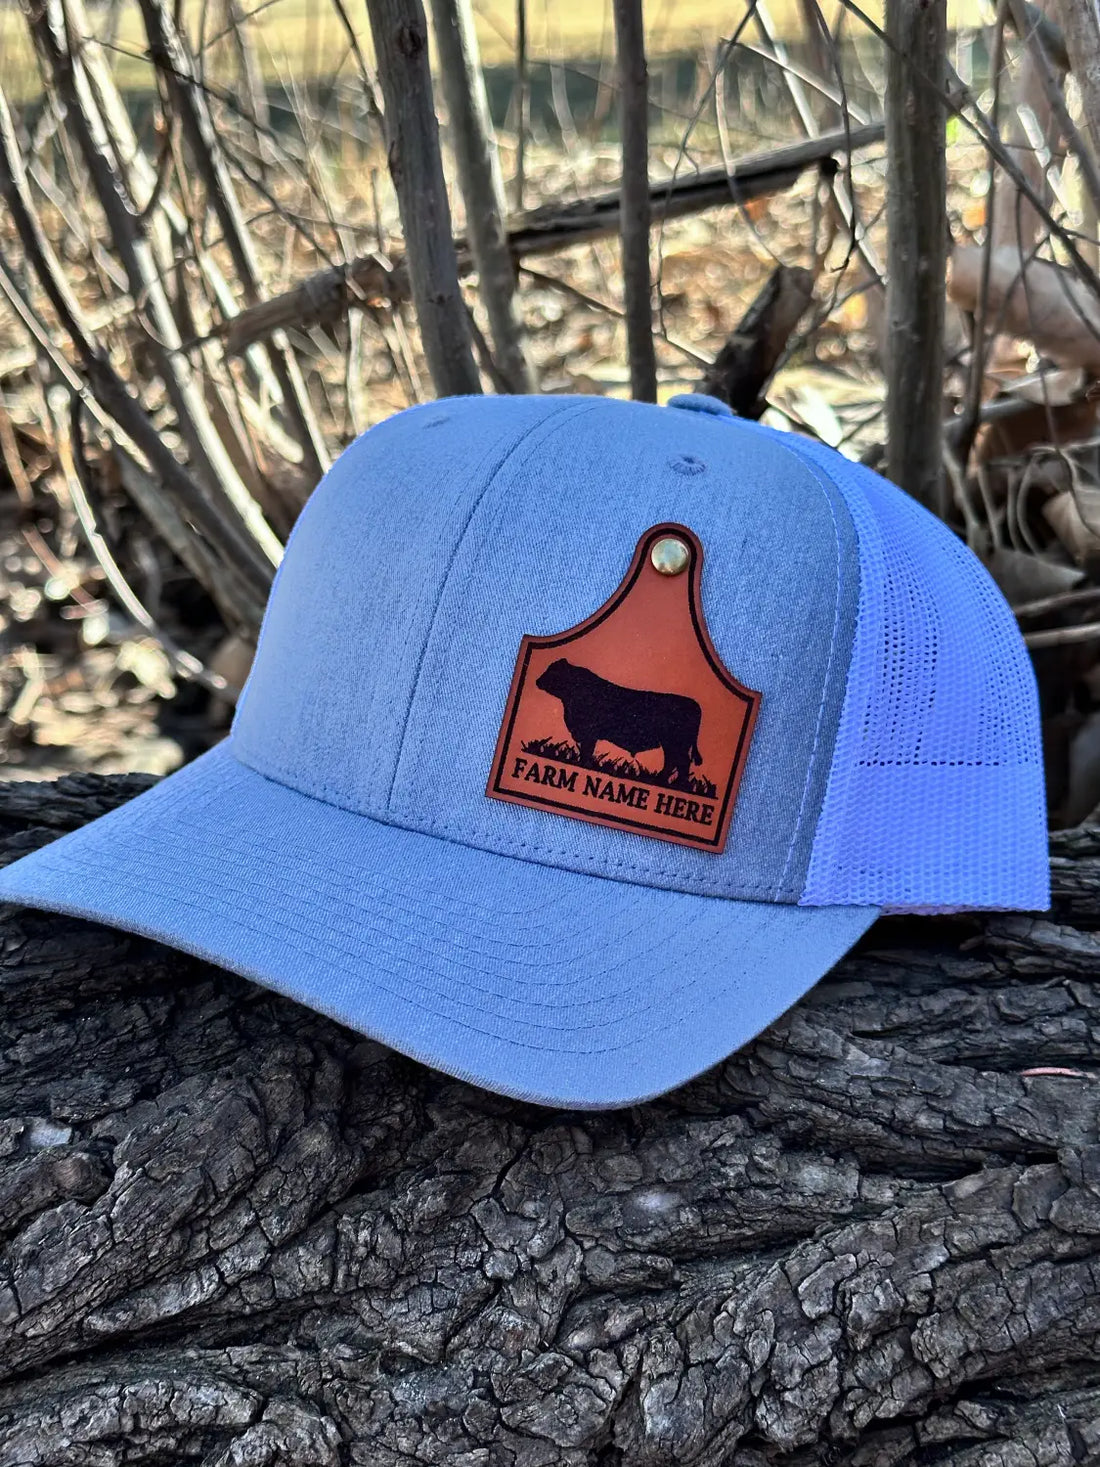 Mooo-ve Over, Boring Hats: Custom Cattle Tag Leather Patch Hats Are Here to Steal the Show!